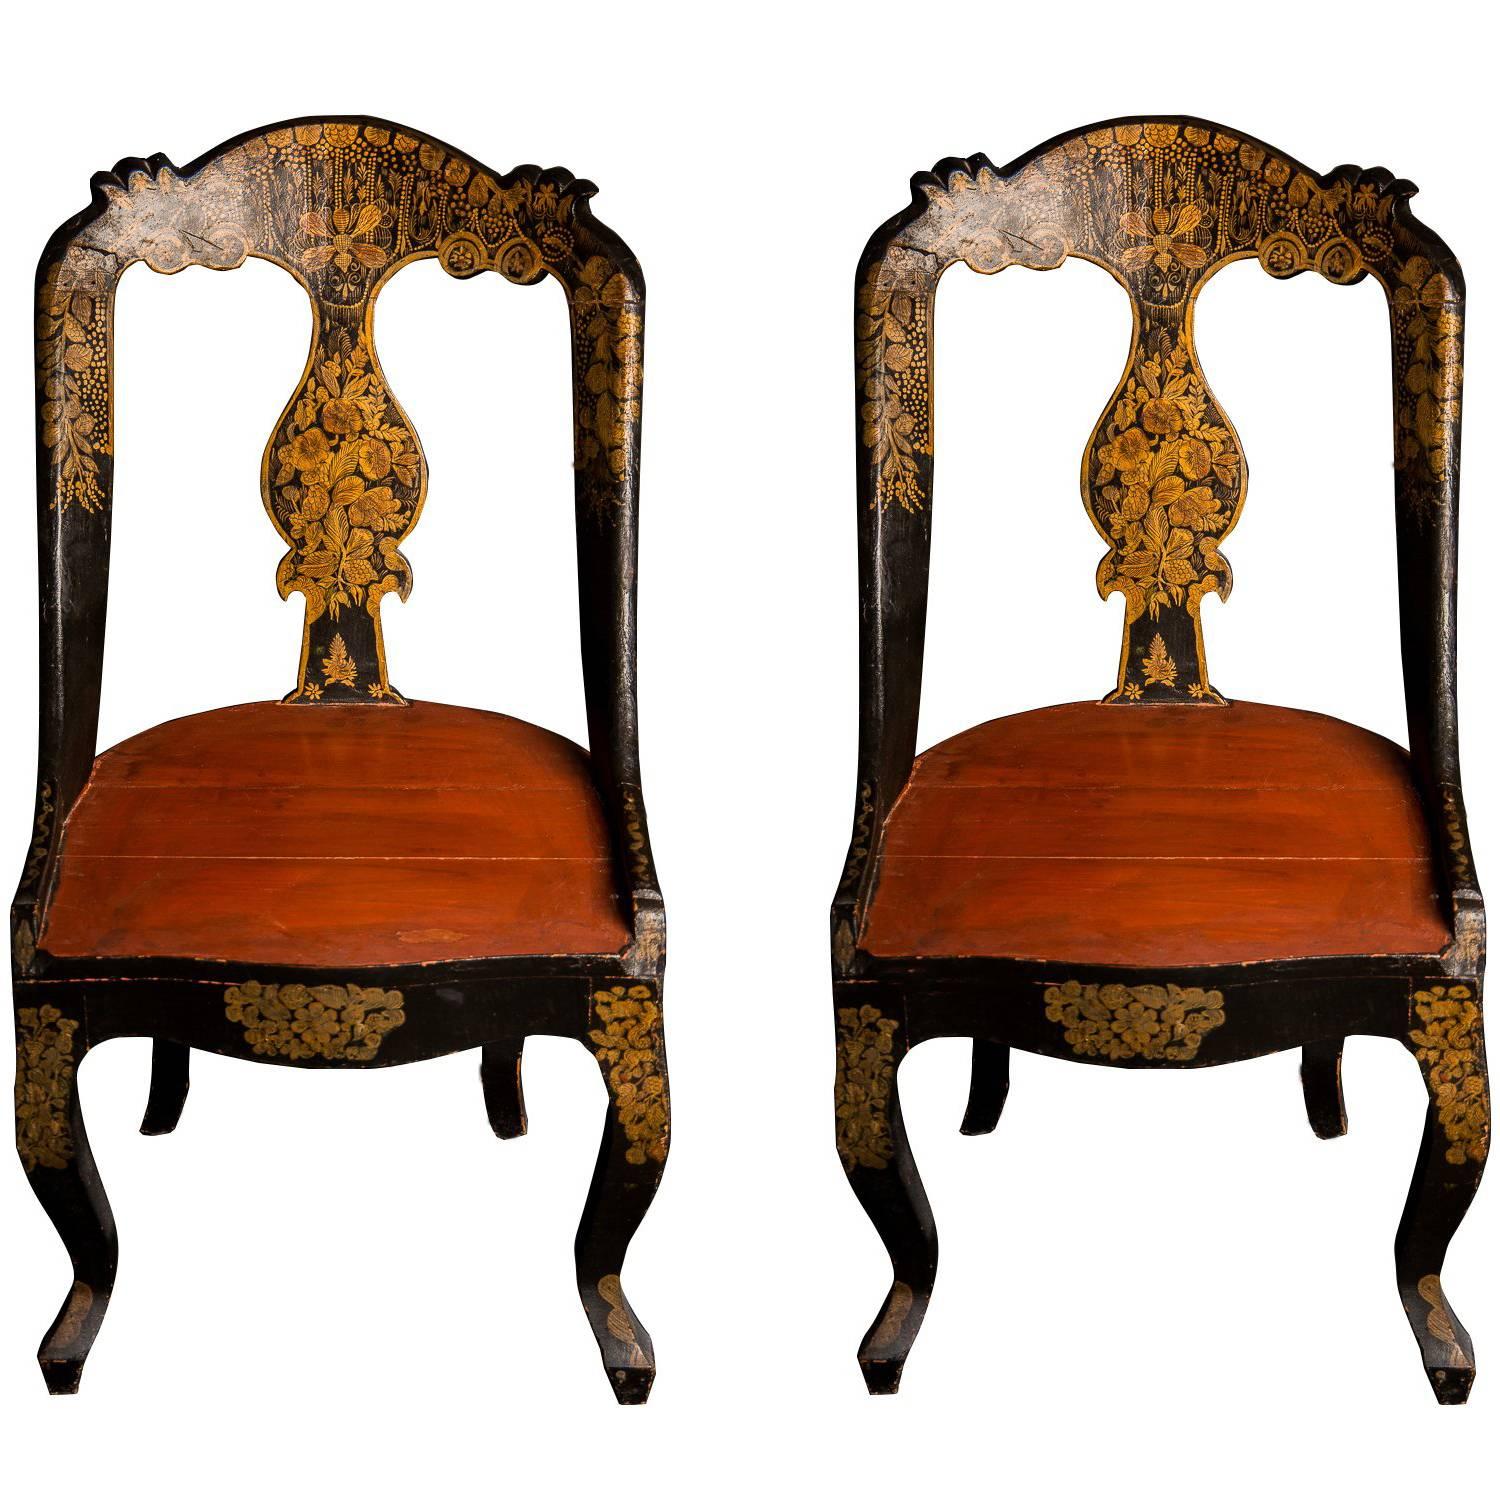 Stylish Pair of Decorative Hand-Painted Anglo-Indian Slipper Chairs